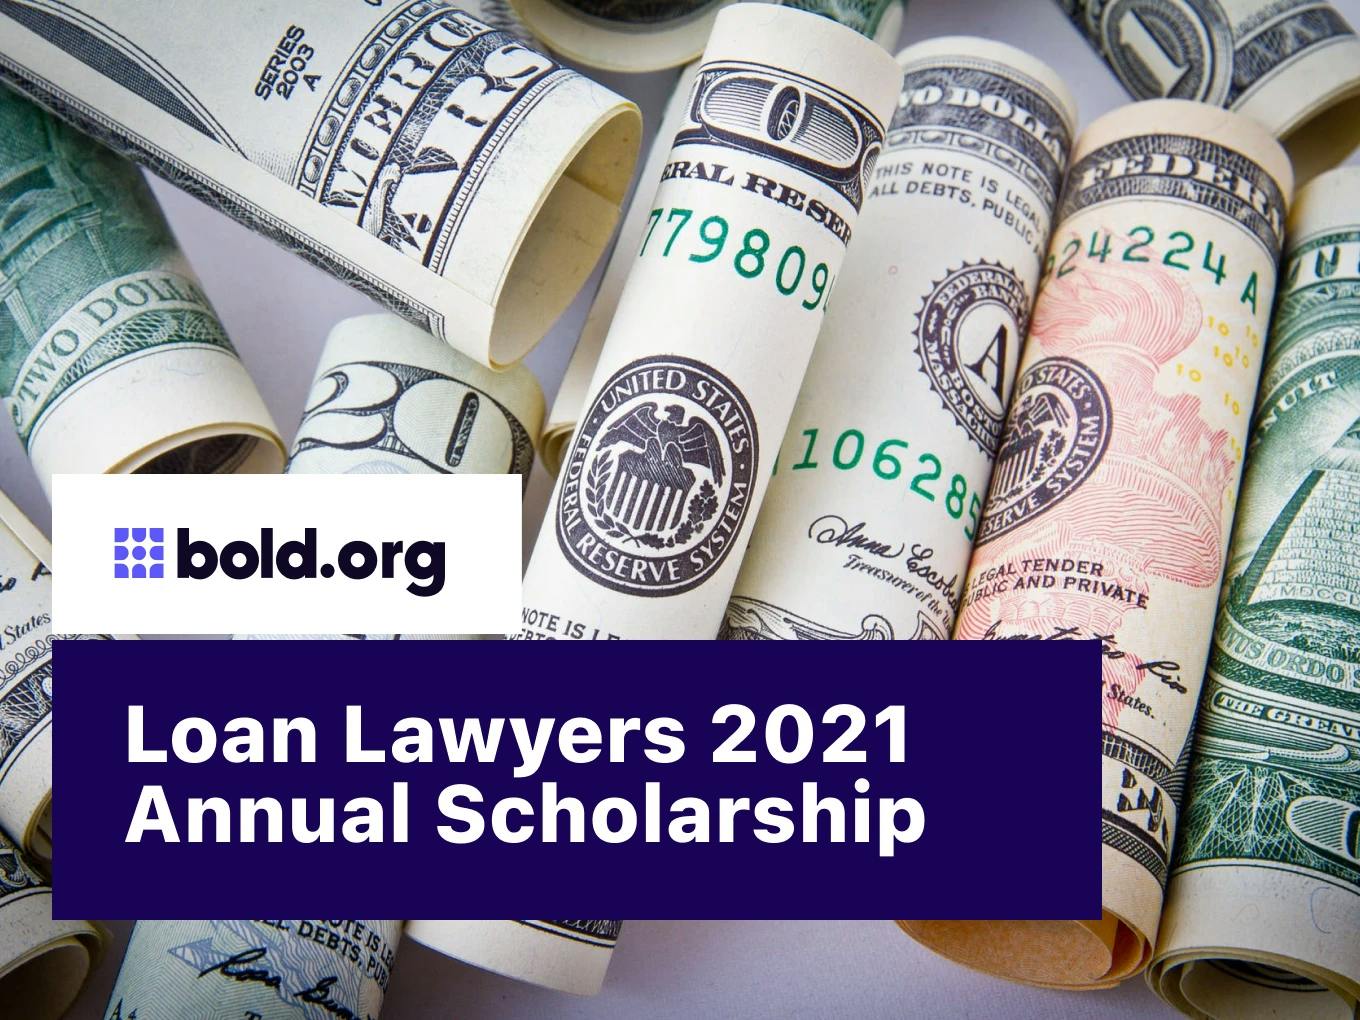 Loan Lawyers 2021 Annual Scholarship Competition